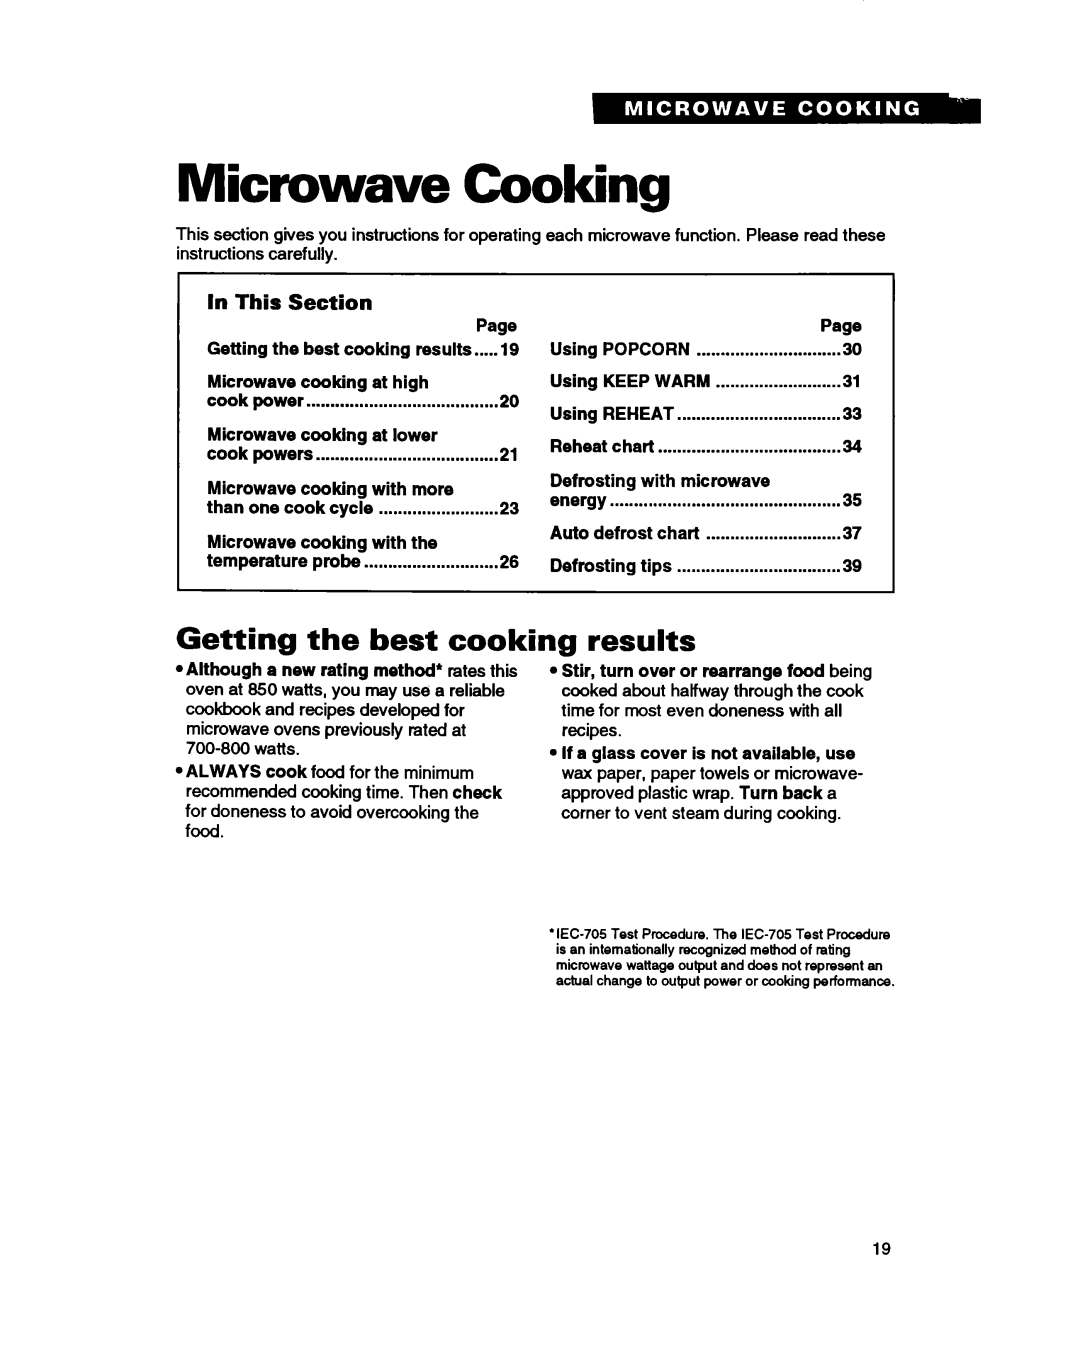 Whirlpool MC8130XA warranty Microwave Cooking, Setting the best cooking results, In This, Section 